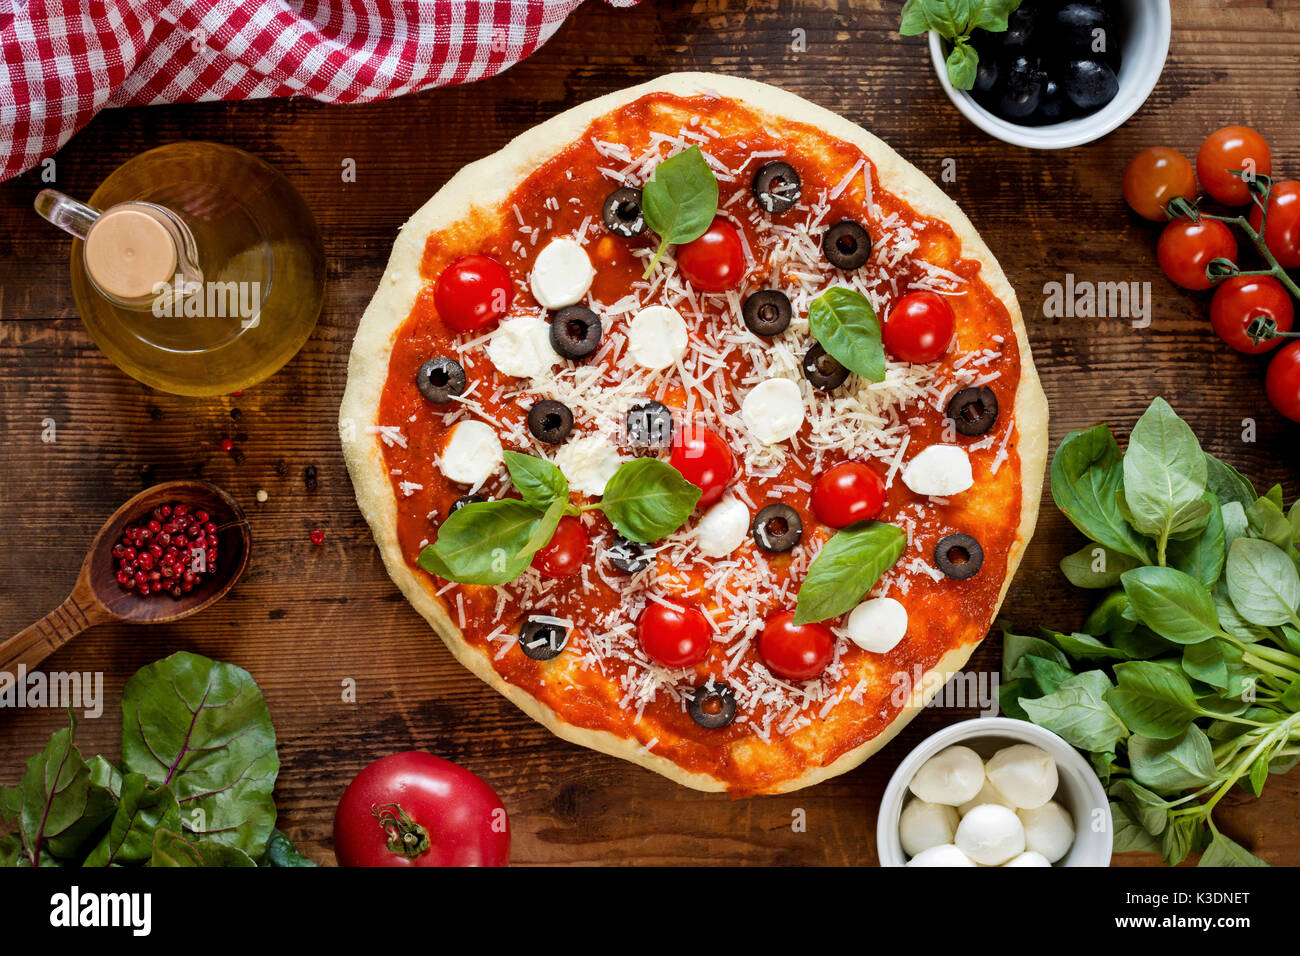 Hot italian pizza with olives, tomatoes, basil, cheese mozzarella. Top view Stock Photo